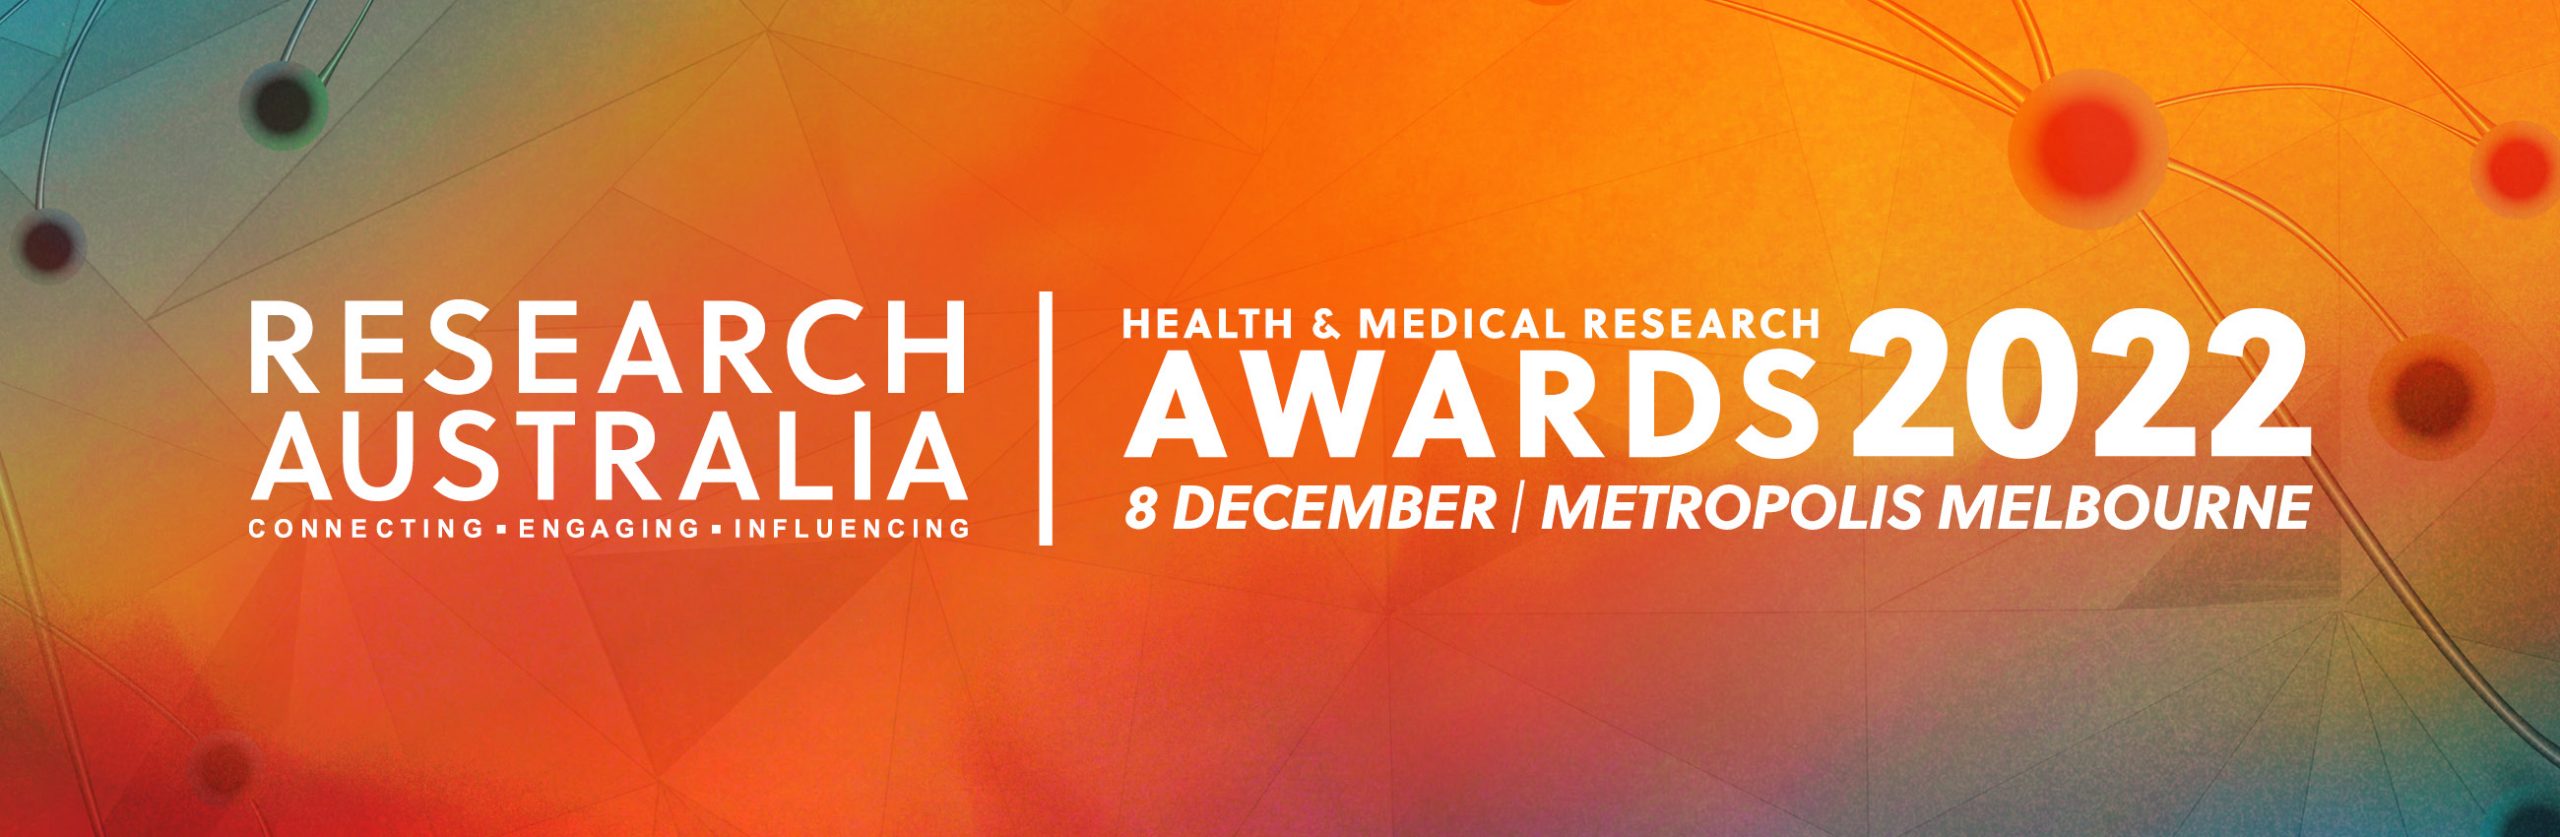 Accolades for Australia’s health and medical research stars